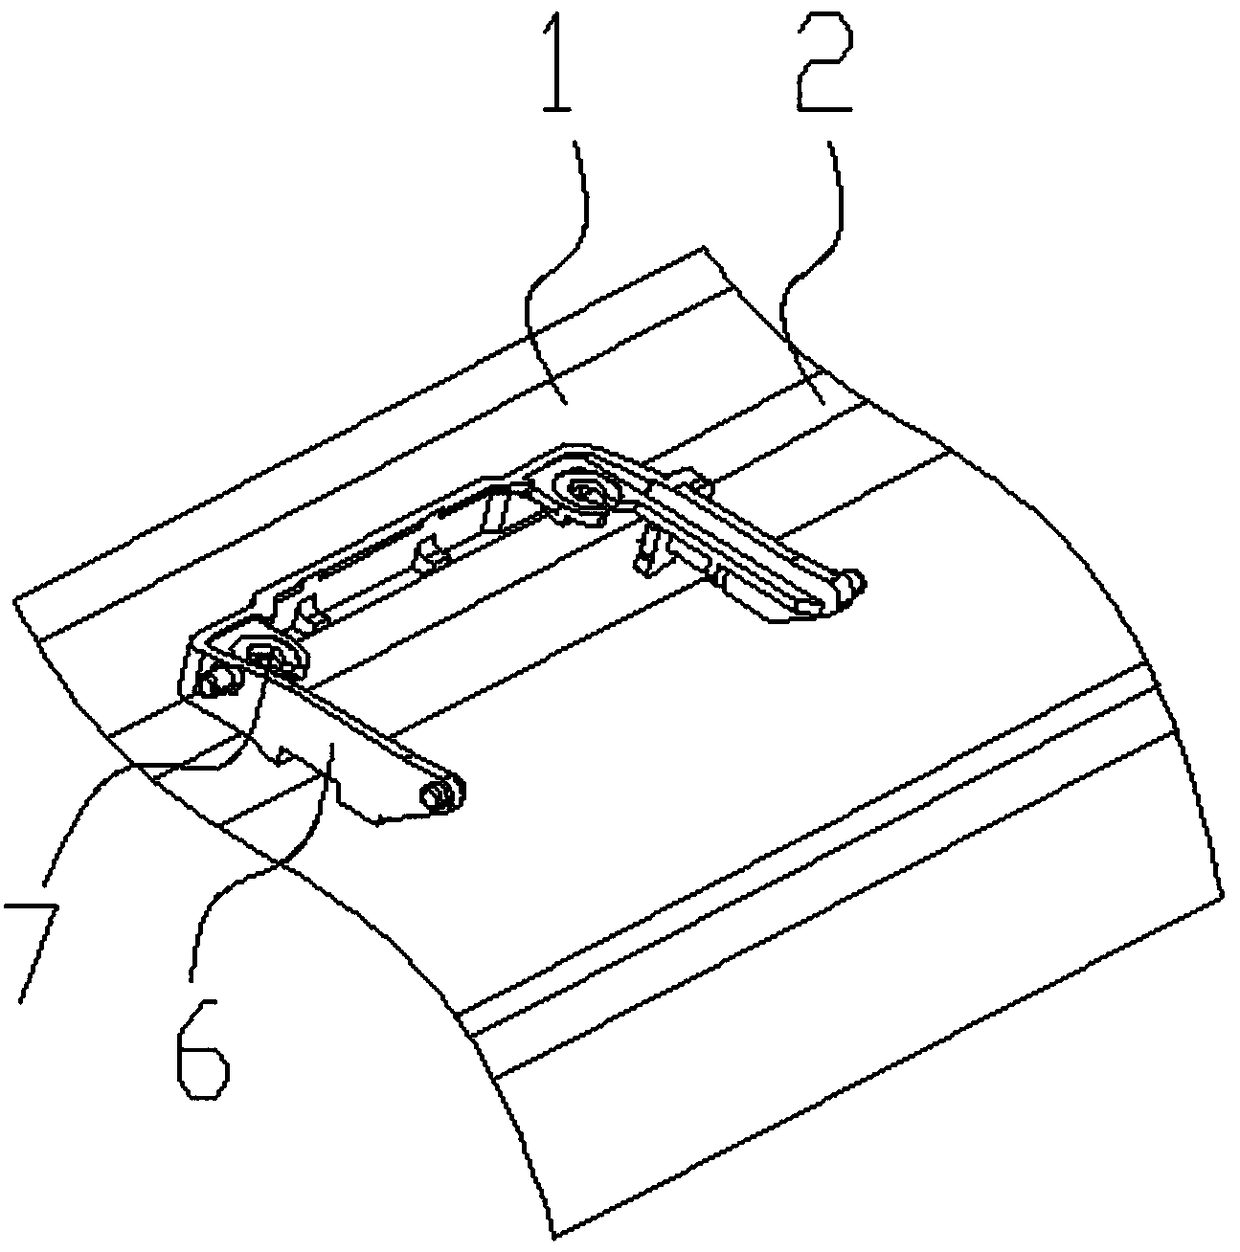 A rubber pad installation mechanism for frame parts